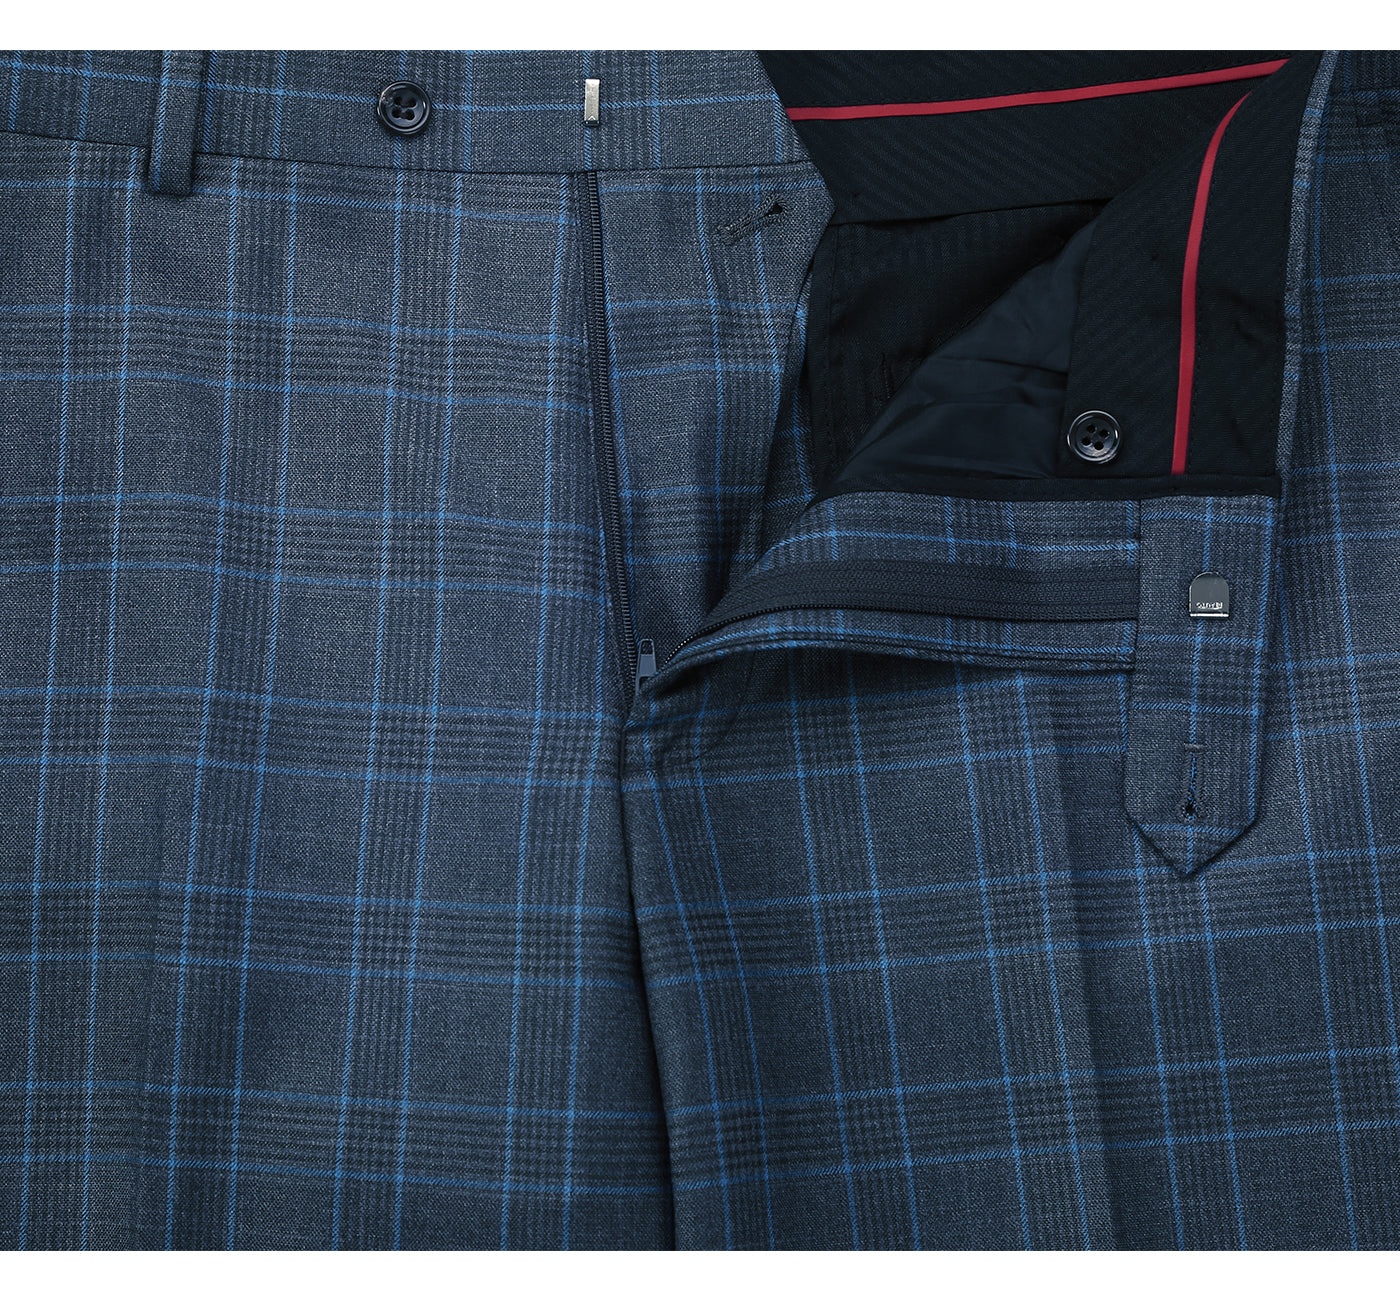 Stretch Performance 2-Button CLASSIC FIT Suit in Blue and Navy Check (Short, Regular, and Long Available) by Renoir